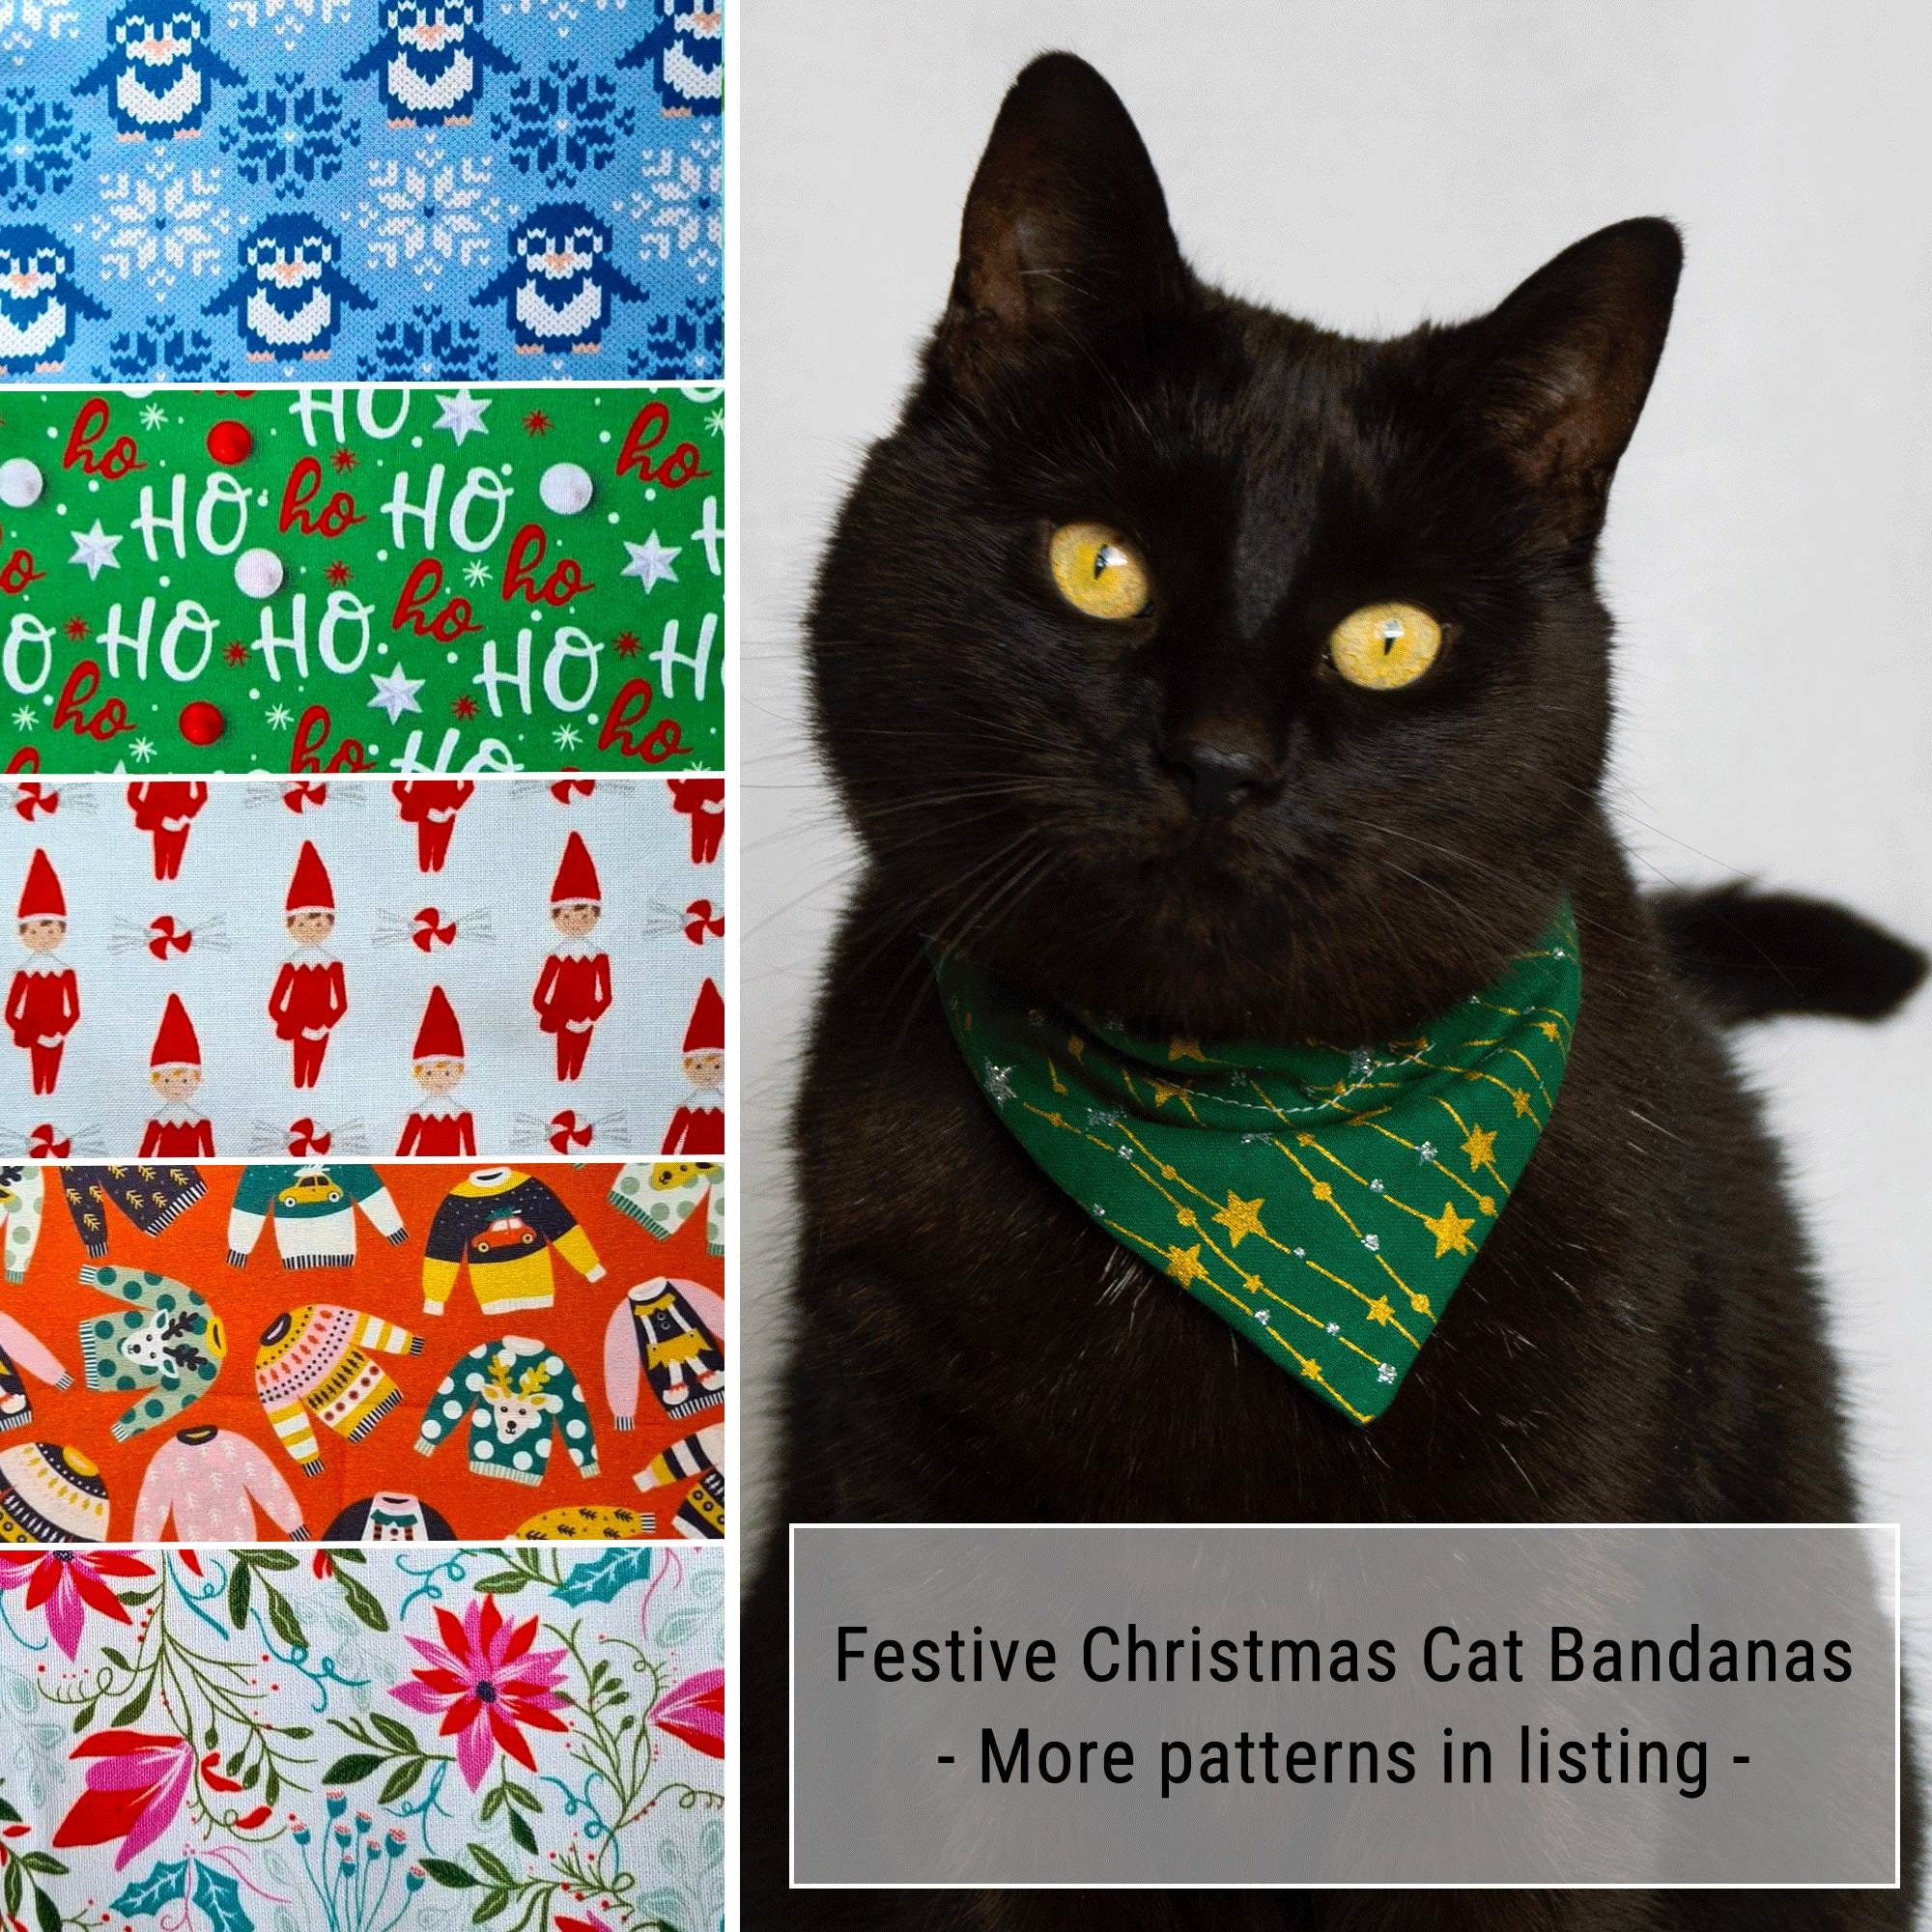 Quick Release Bandana Kitten Collar Cats Collar Breakaway with Bow Tie and Bell Length Adjustable Christmas Cat Collar Classic Plaid Kitty Collar with Snowflake Print for Xmas Party 7.8”-10.9” 